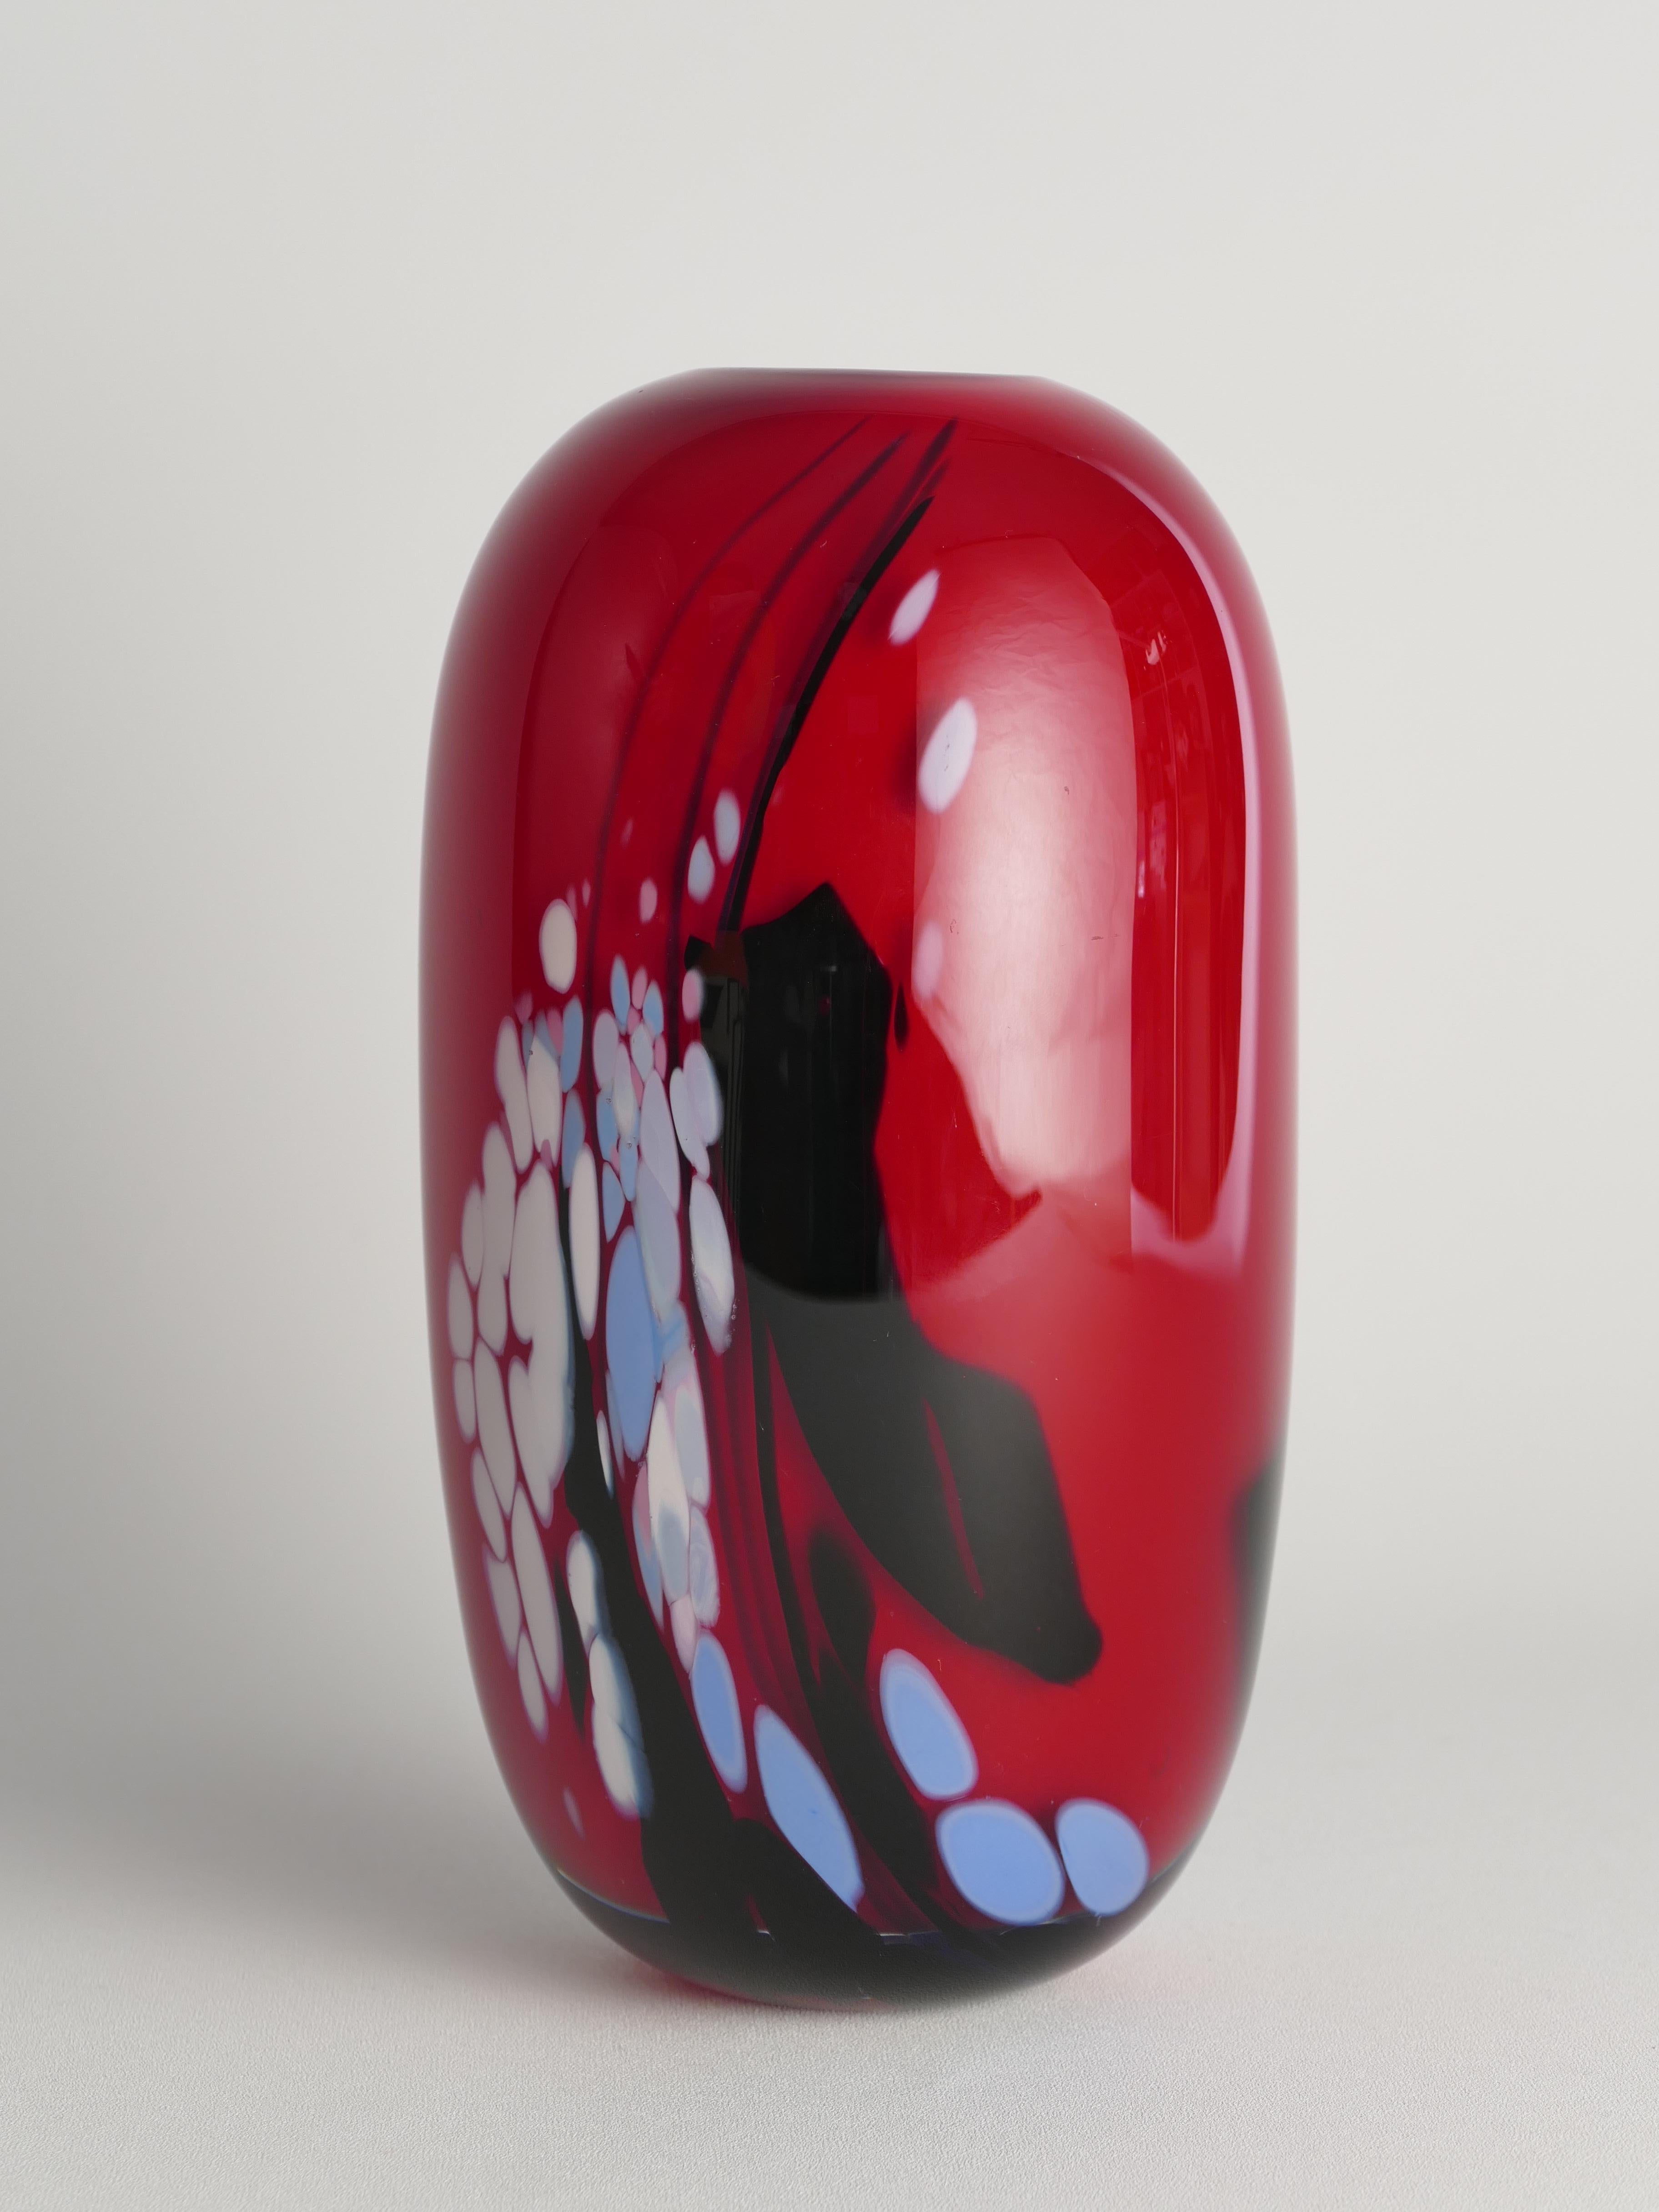 Unique Cherry Red Art Glass Vase by Mikael Axenbrant, Sweden 1990 For Sale 5